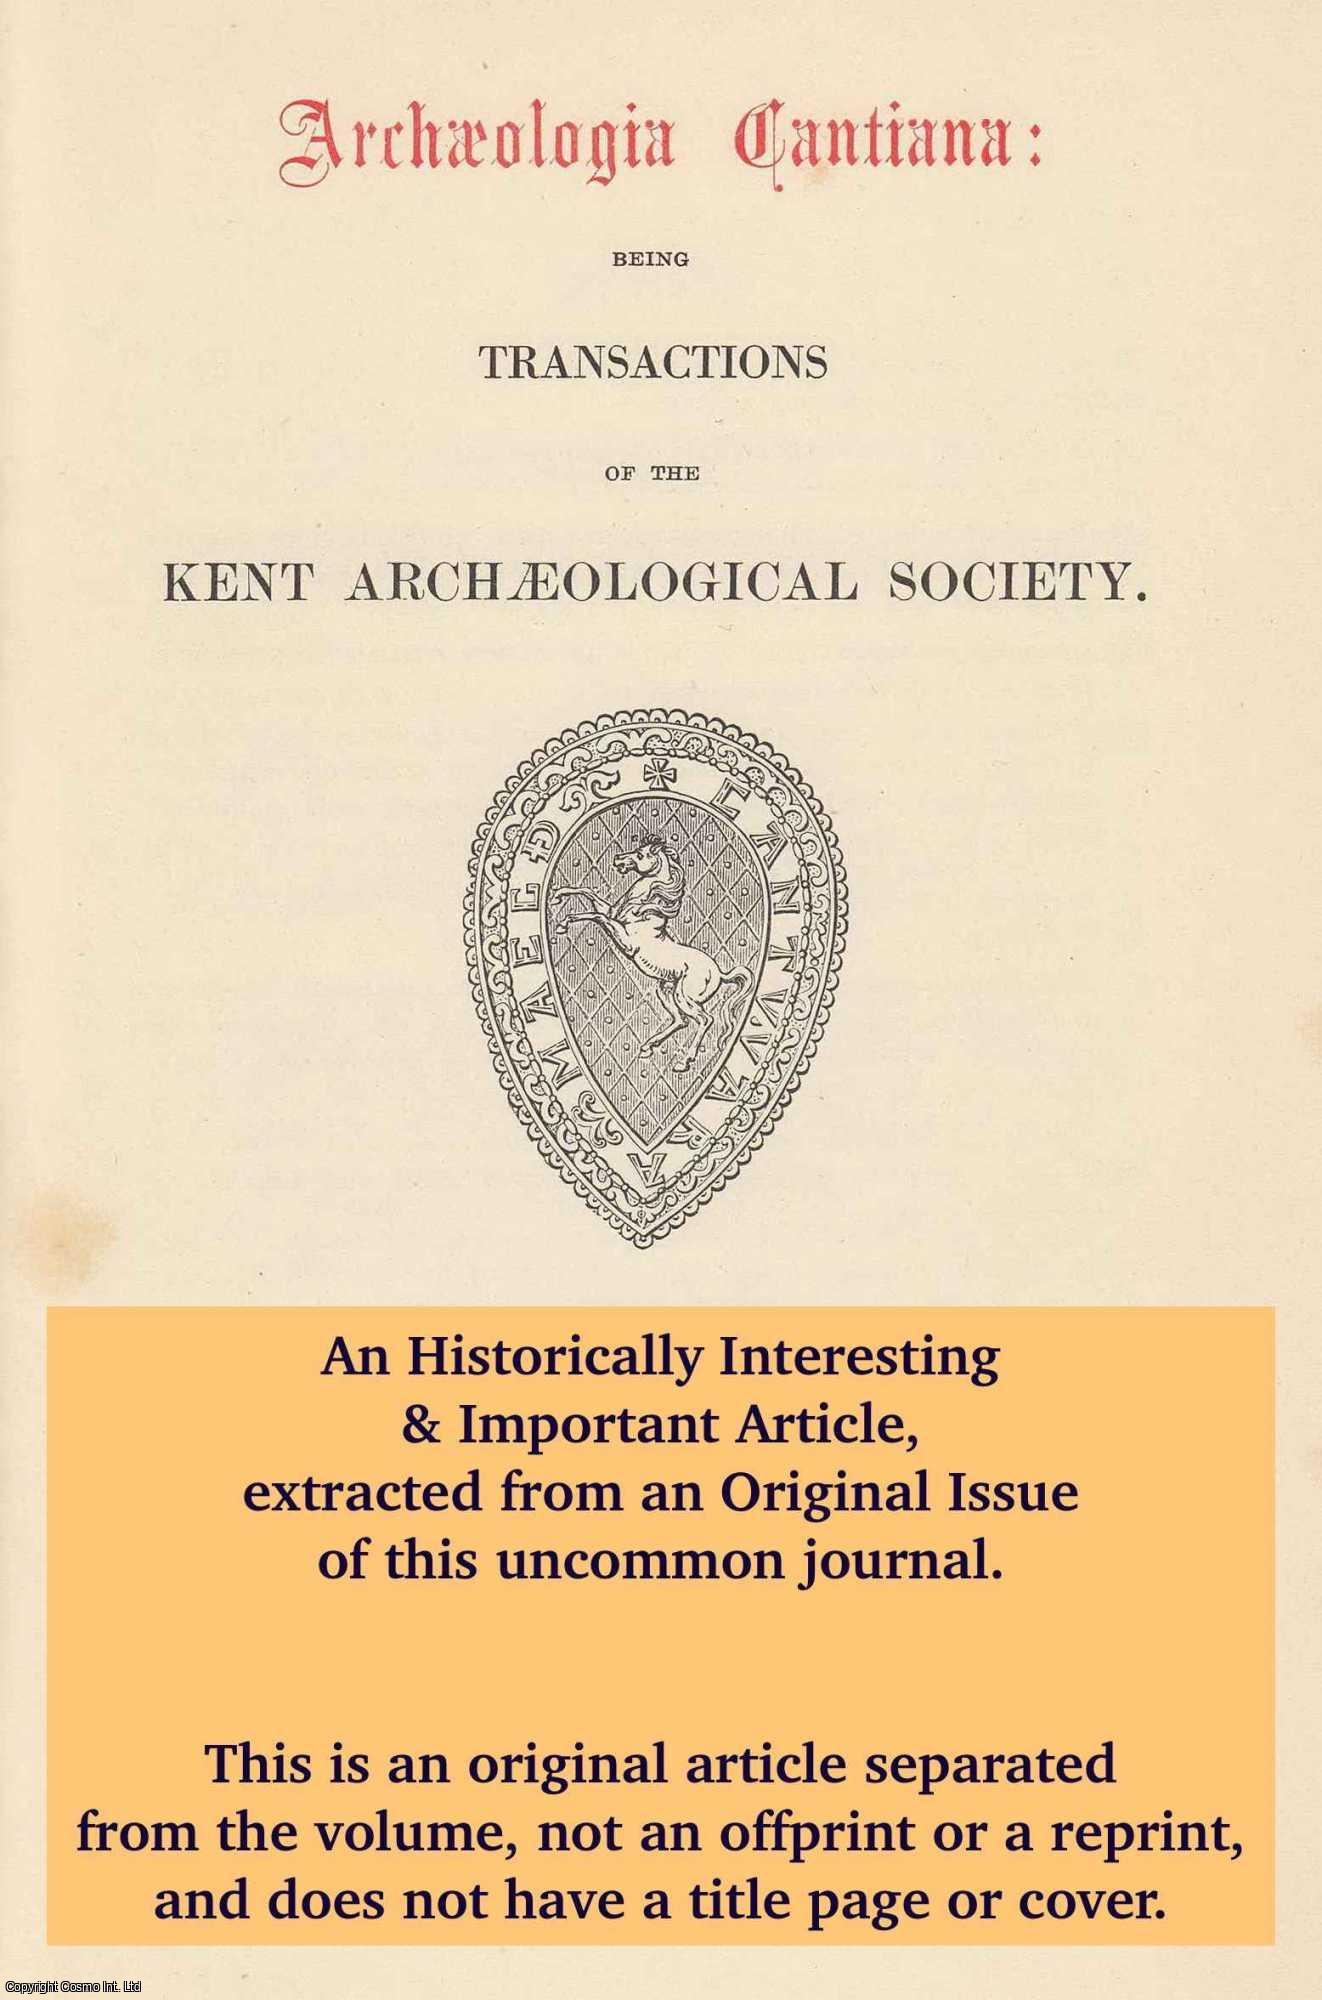 A.P. Detsicas - Excavations at Eccles, 1971; Tenth Interim Report. An original article from The Archaeologia Cantiana: Transactions of The Kent Archaeological Society, 1973.